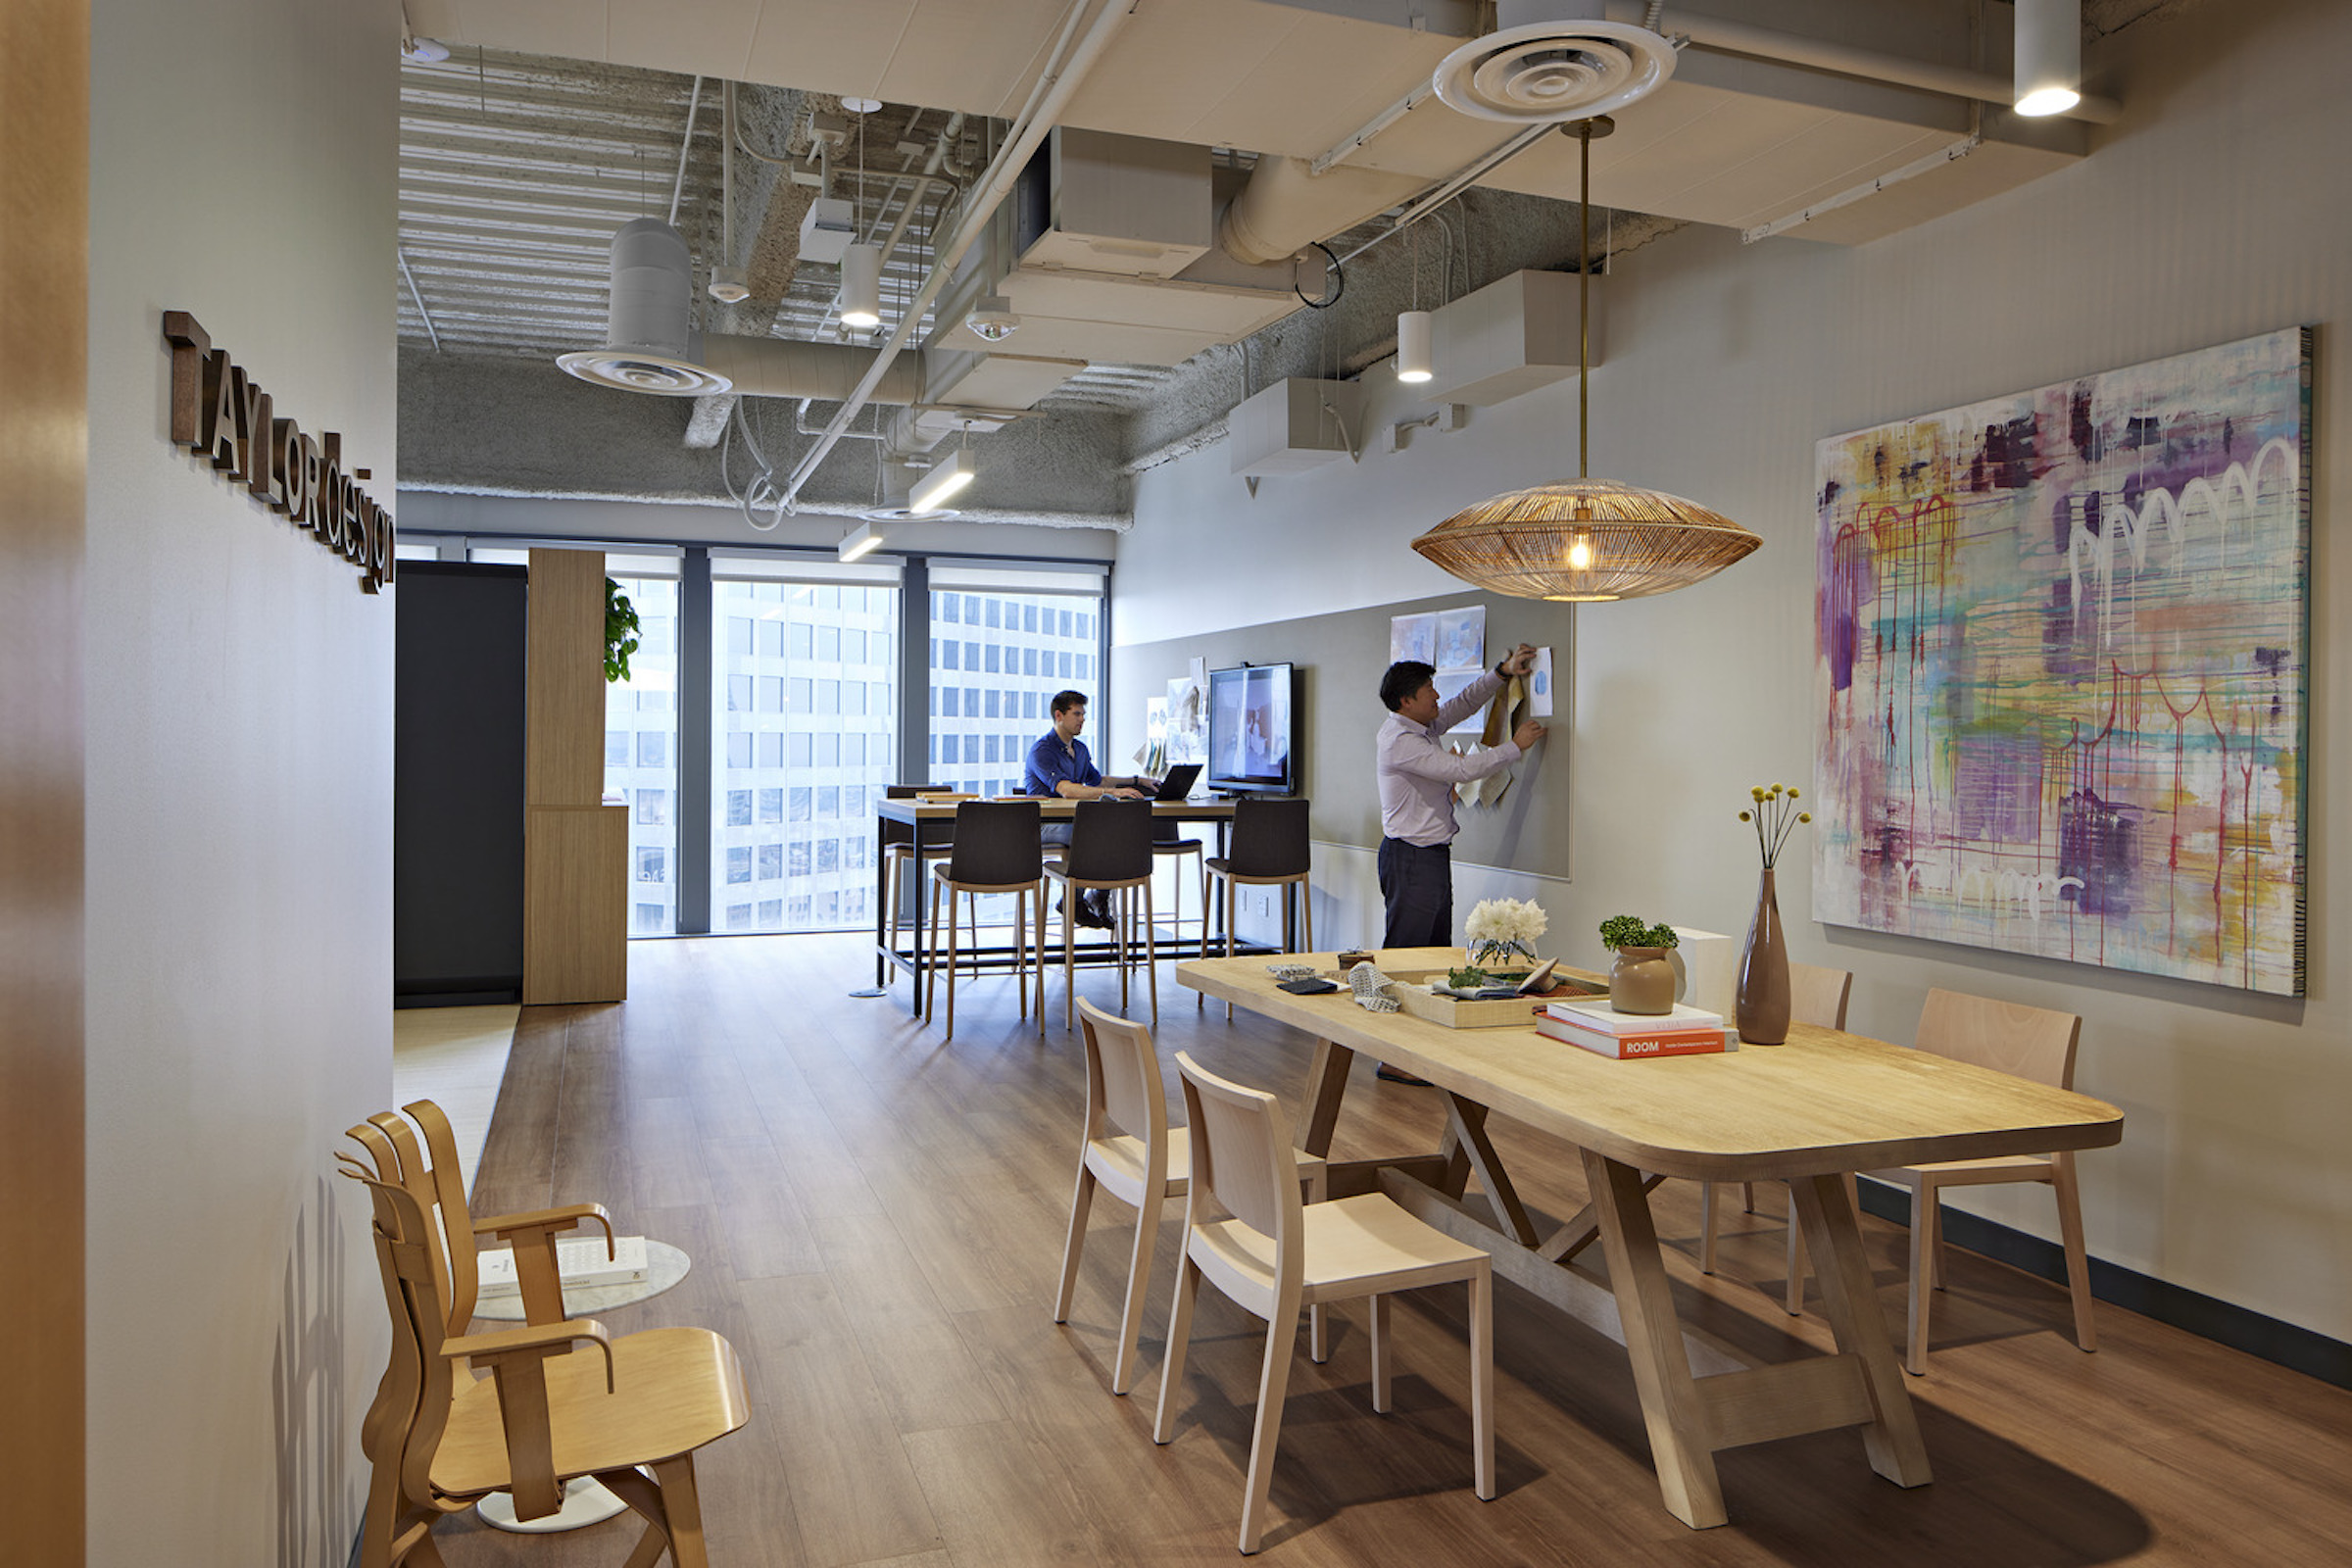 This photo of Taylor Design’s LA office shows standard branding, decorative lighting, and a family table (the 70%), with community art (the 30%) unique to the location.